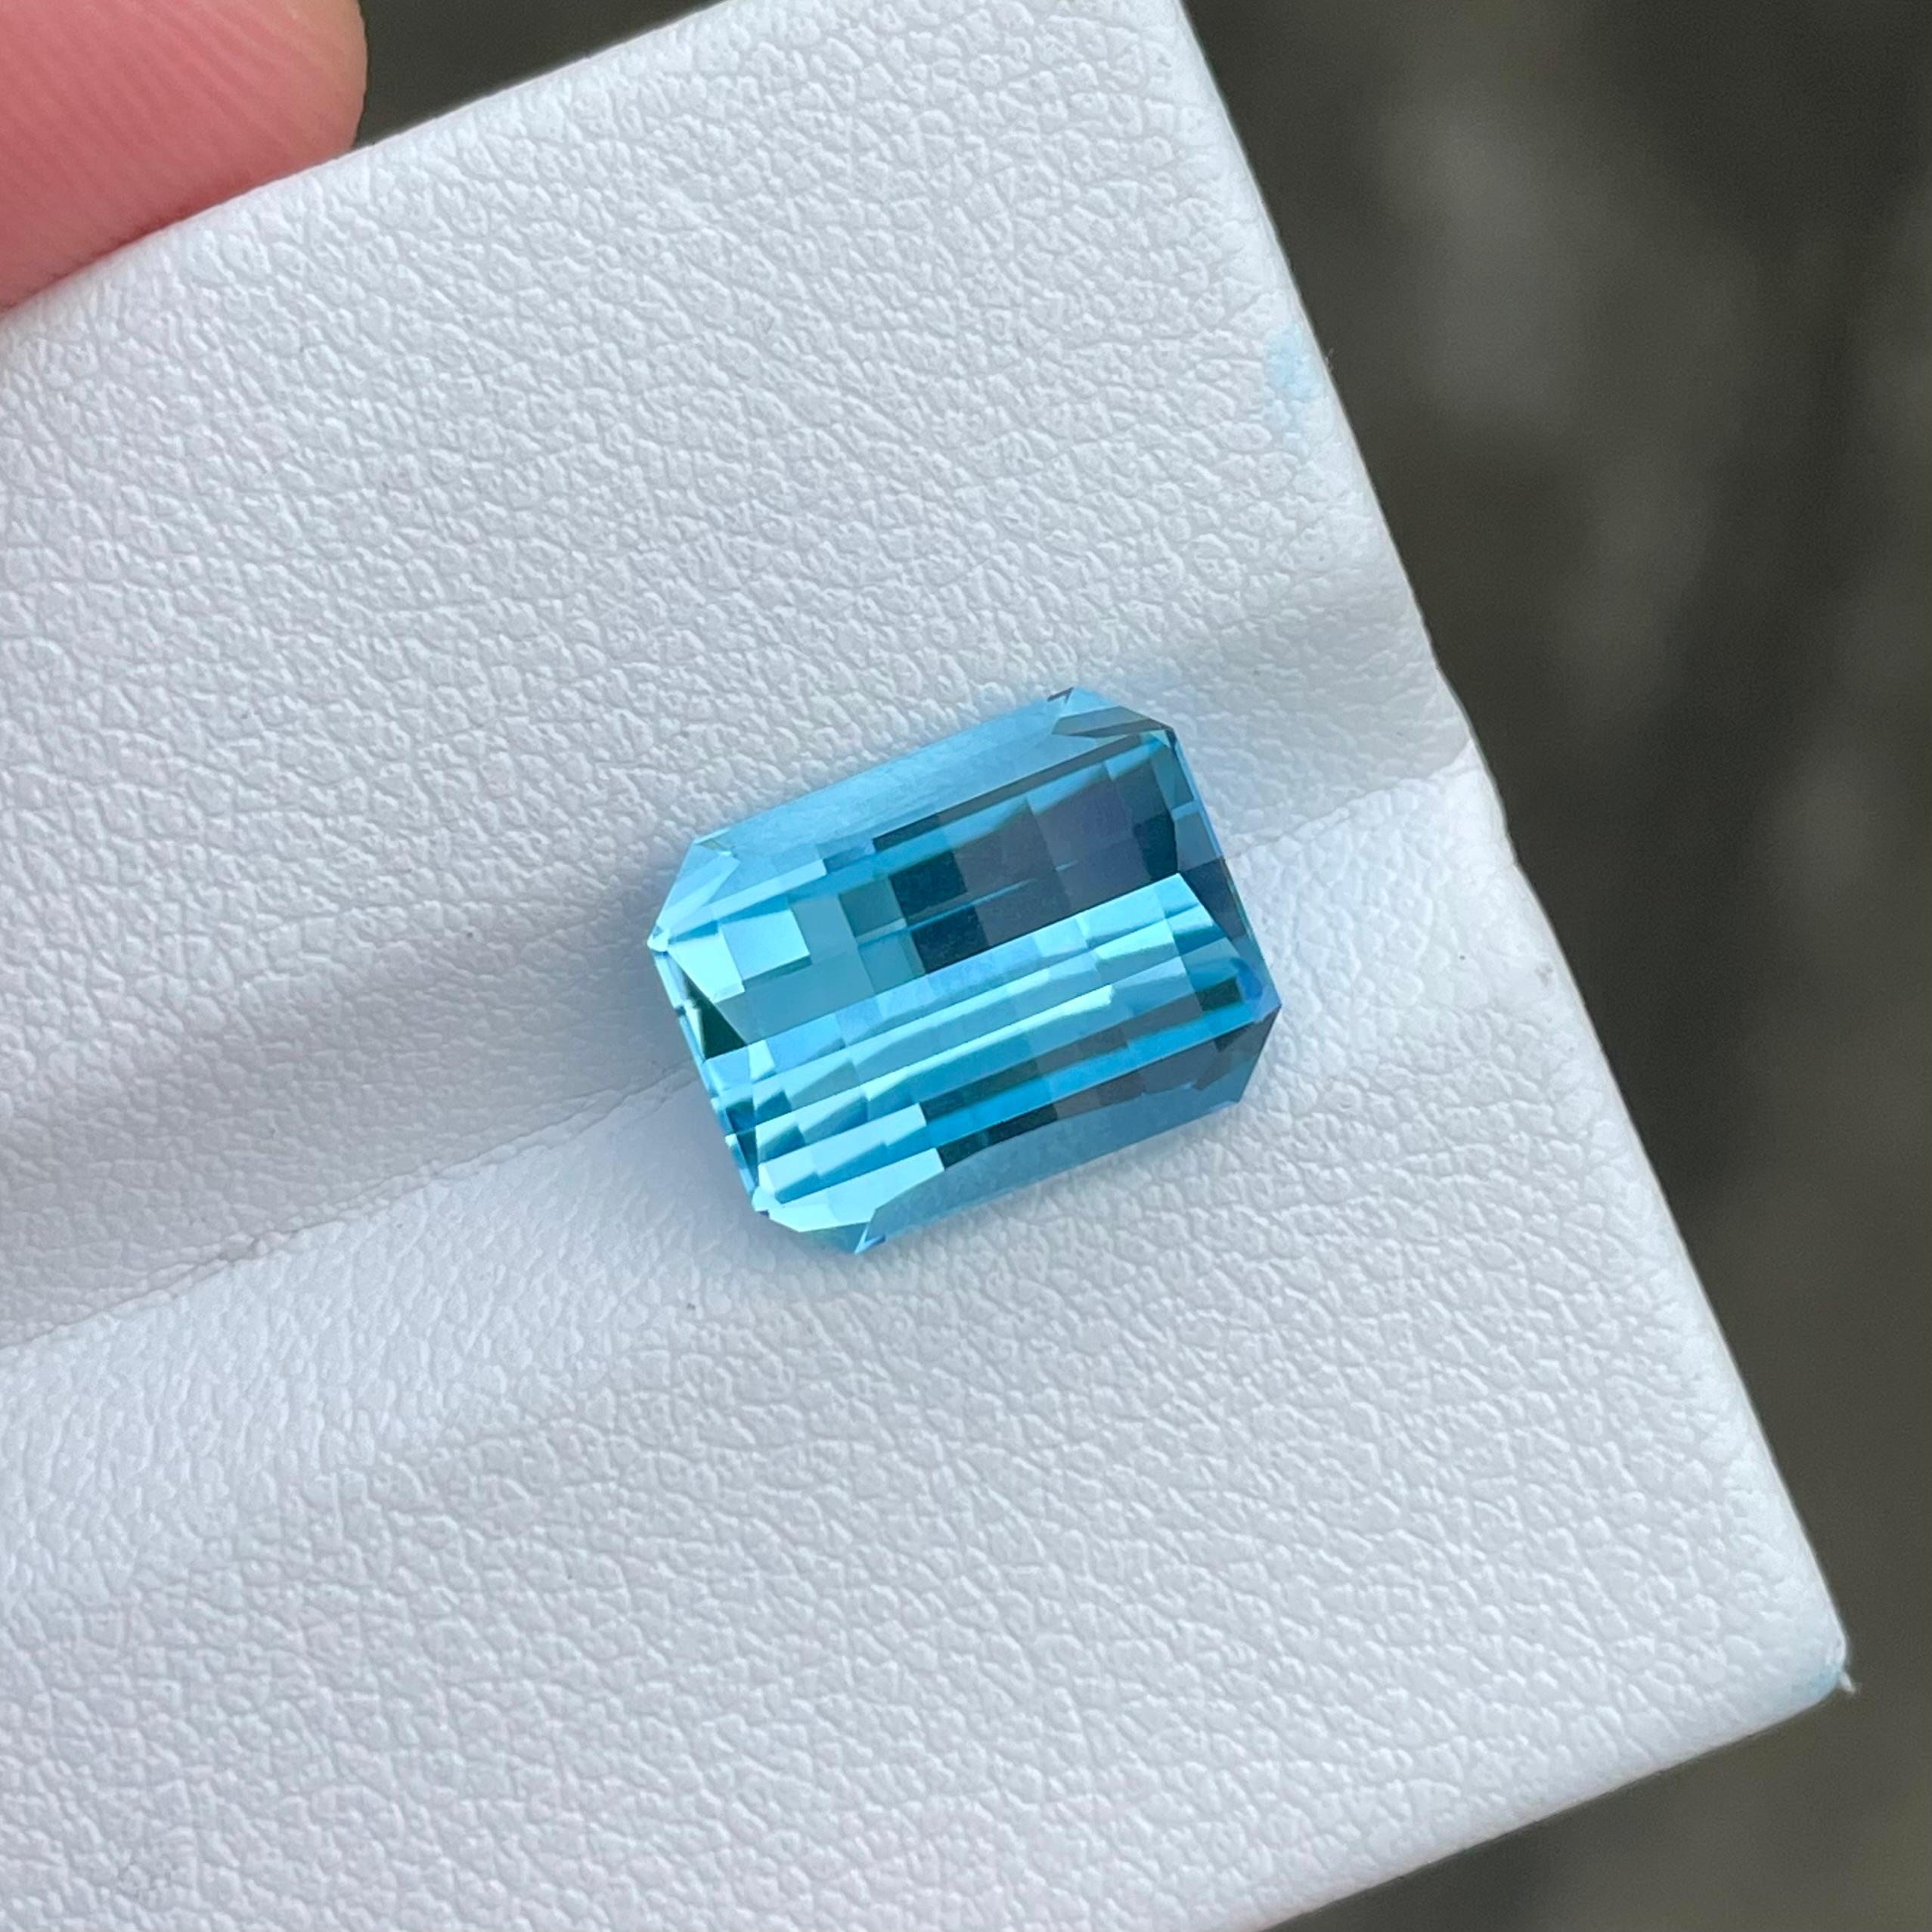 Weight 7.40 carats 
Dimensions 11.7 x 9.3 x 7.1 mm
Treatment Heated 
Origin Madagascar 
Clarity Loupe Clean 
Shape Octagon 
Cut Oppose Bar Pixel 



Discover the exquisite allure of a 7.40-carat Oppose Bar Pixel Cut Swiss Blue Topaz, a natural